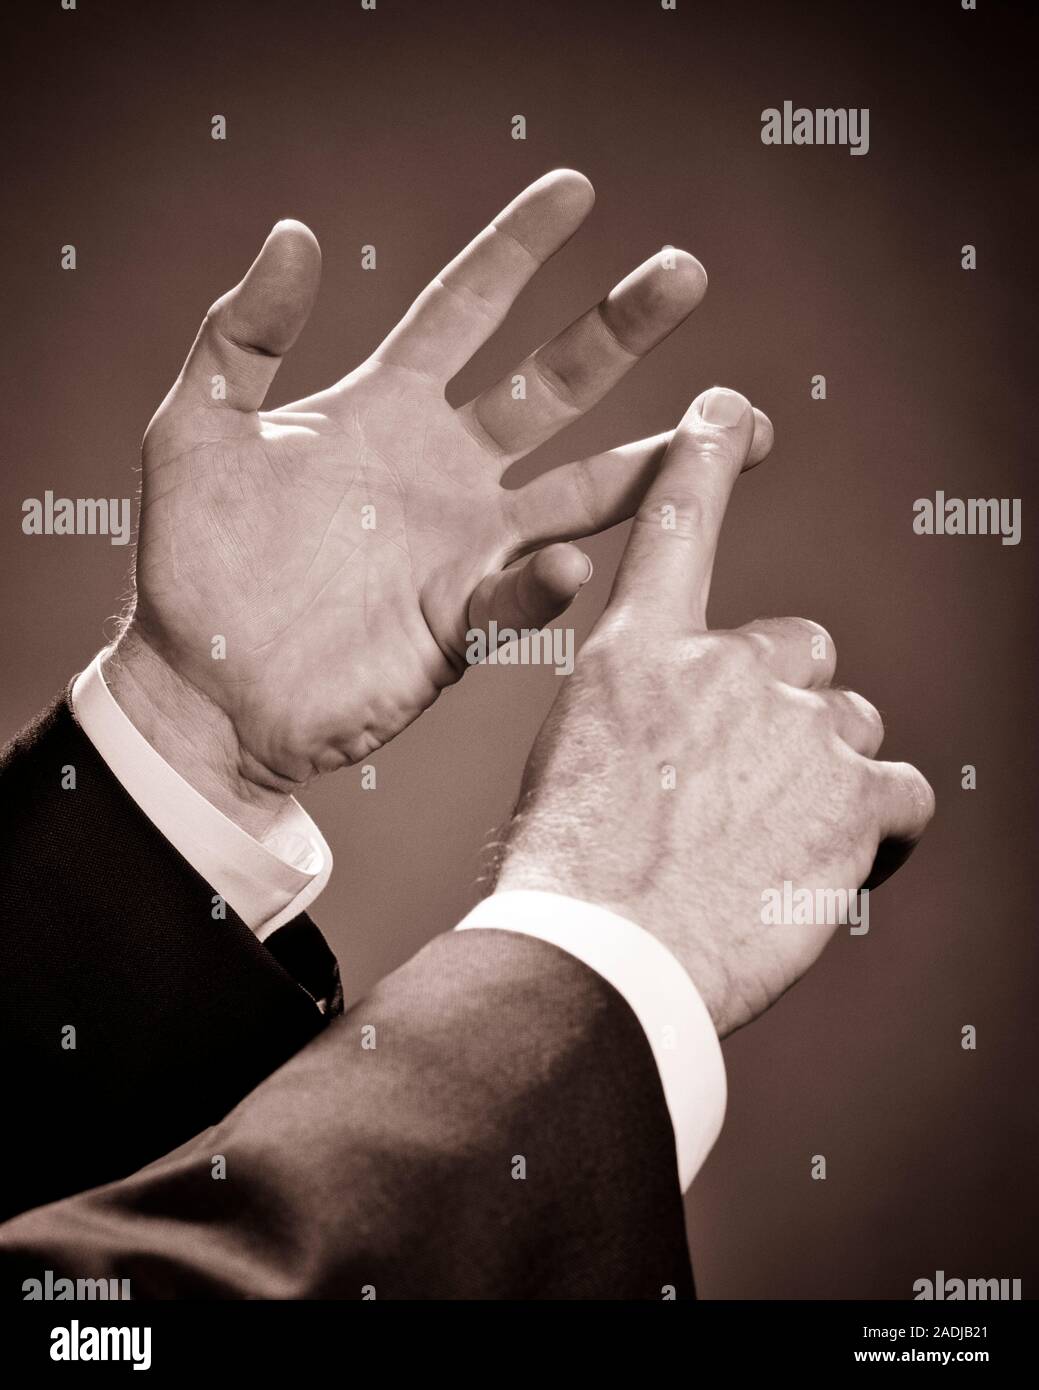 1960s MAN HANDS ONLY ENUMERATING VIEWPOINTS ONE BY ONE GESTURE OF INDEX FINGER TOUCHING EACH FINGER AS THEY ARE LISTED OR SPOKEN - s16463 HAR001 HARS MALES SYMBOLS CONFIDENCE EXECUTIVES GESTURING B&W INDEX STRATEGY NETWORKING OPPORTUNITY GESTURES OCCUPATIONS POLITICS BOSSES CONCEPT CONCEPTUAL LISTING POINTS ENUMERATING ENUMERATE OR SPOKEN SYMBOLIC ARGUMENTS CITE CONCEPTS IDEAS INDICATE MANAGERS SALESMEN BLACK AND WHITE CAUCASIAN ETHNICITY DEBATING HANDS ONLY HAR001 OLD FASHIONED REPRESENTATION Stock Photo